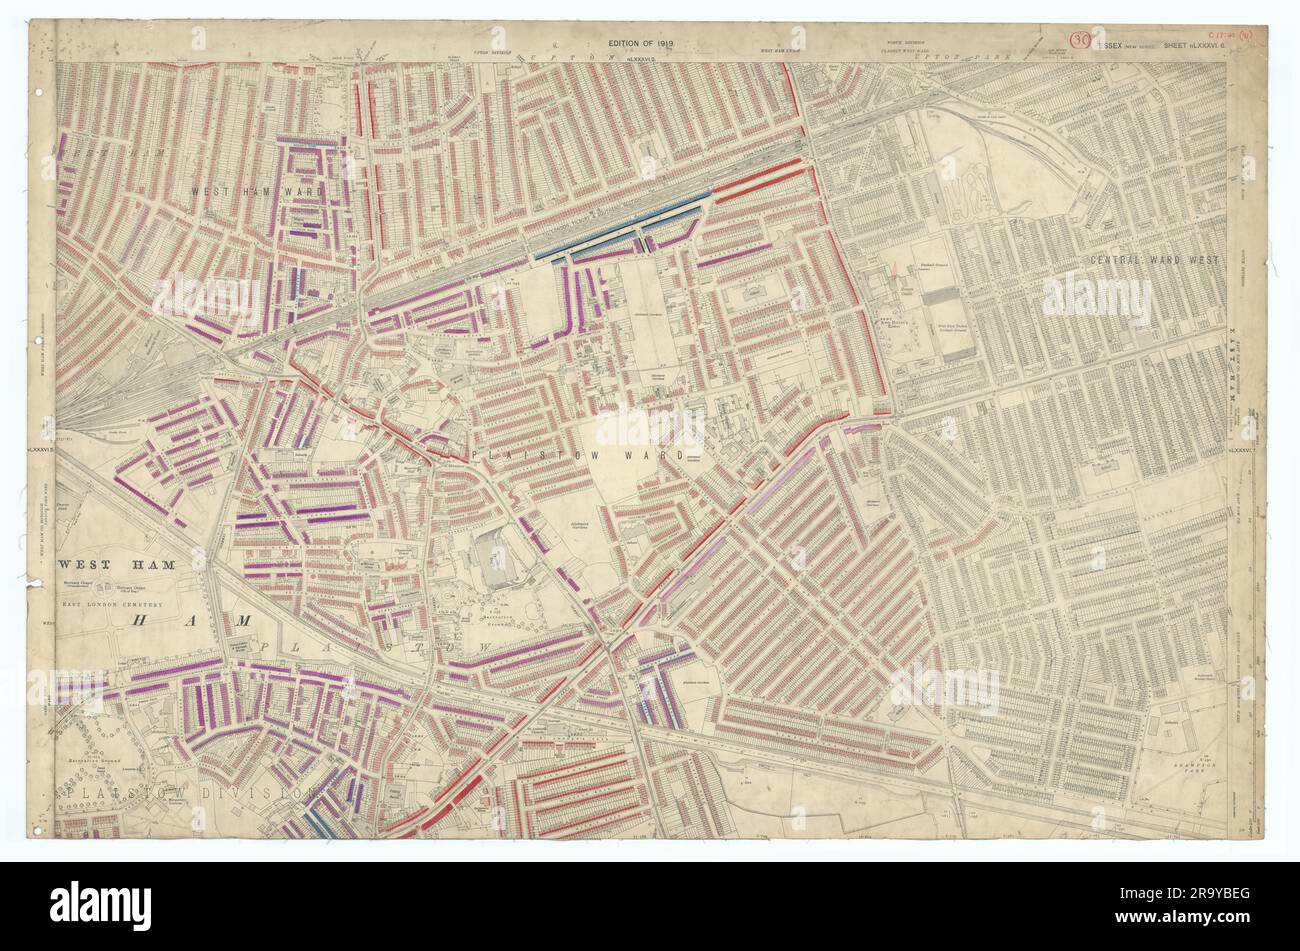 LSE POVERTY OS PROOF MAP West/East Ham - Plaistow - Upton Park - Greengate 1928 Stock Photo